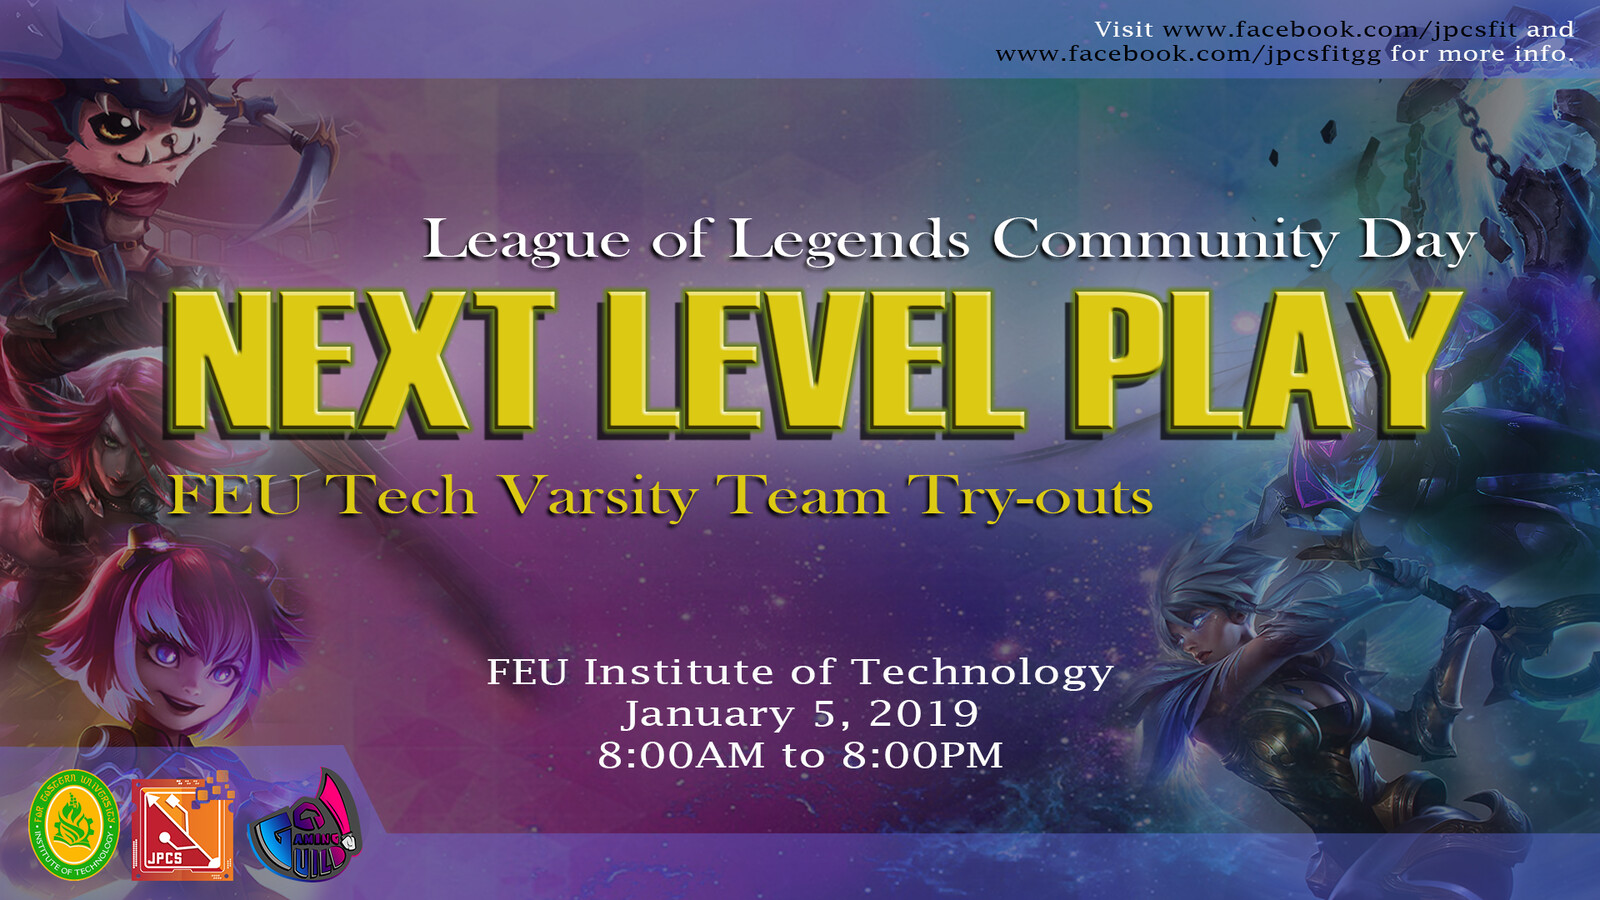 FIT Gaming Guild Next Level Play Poster 2